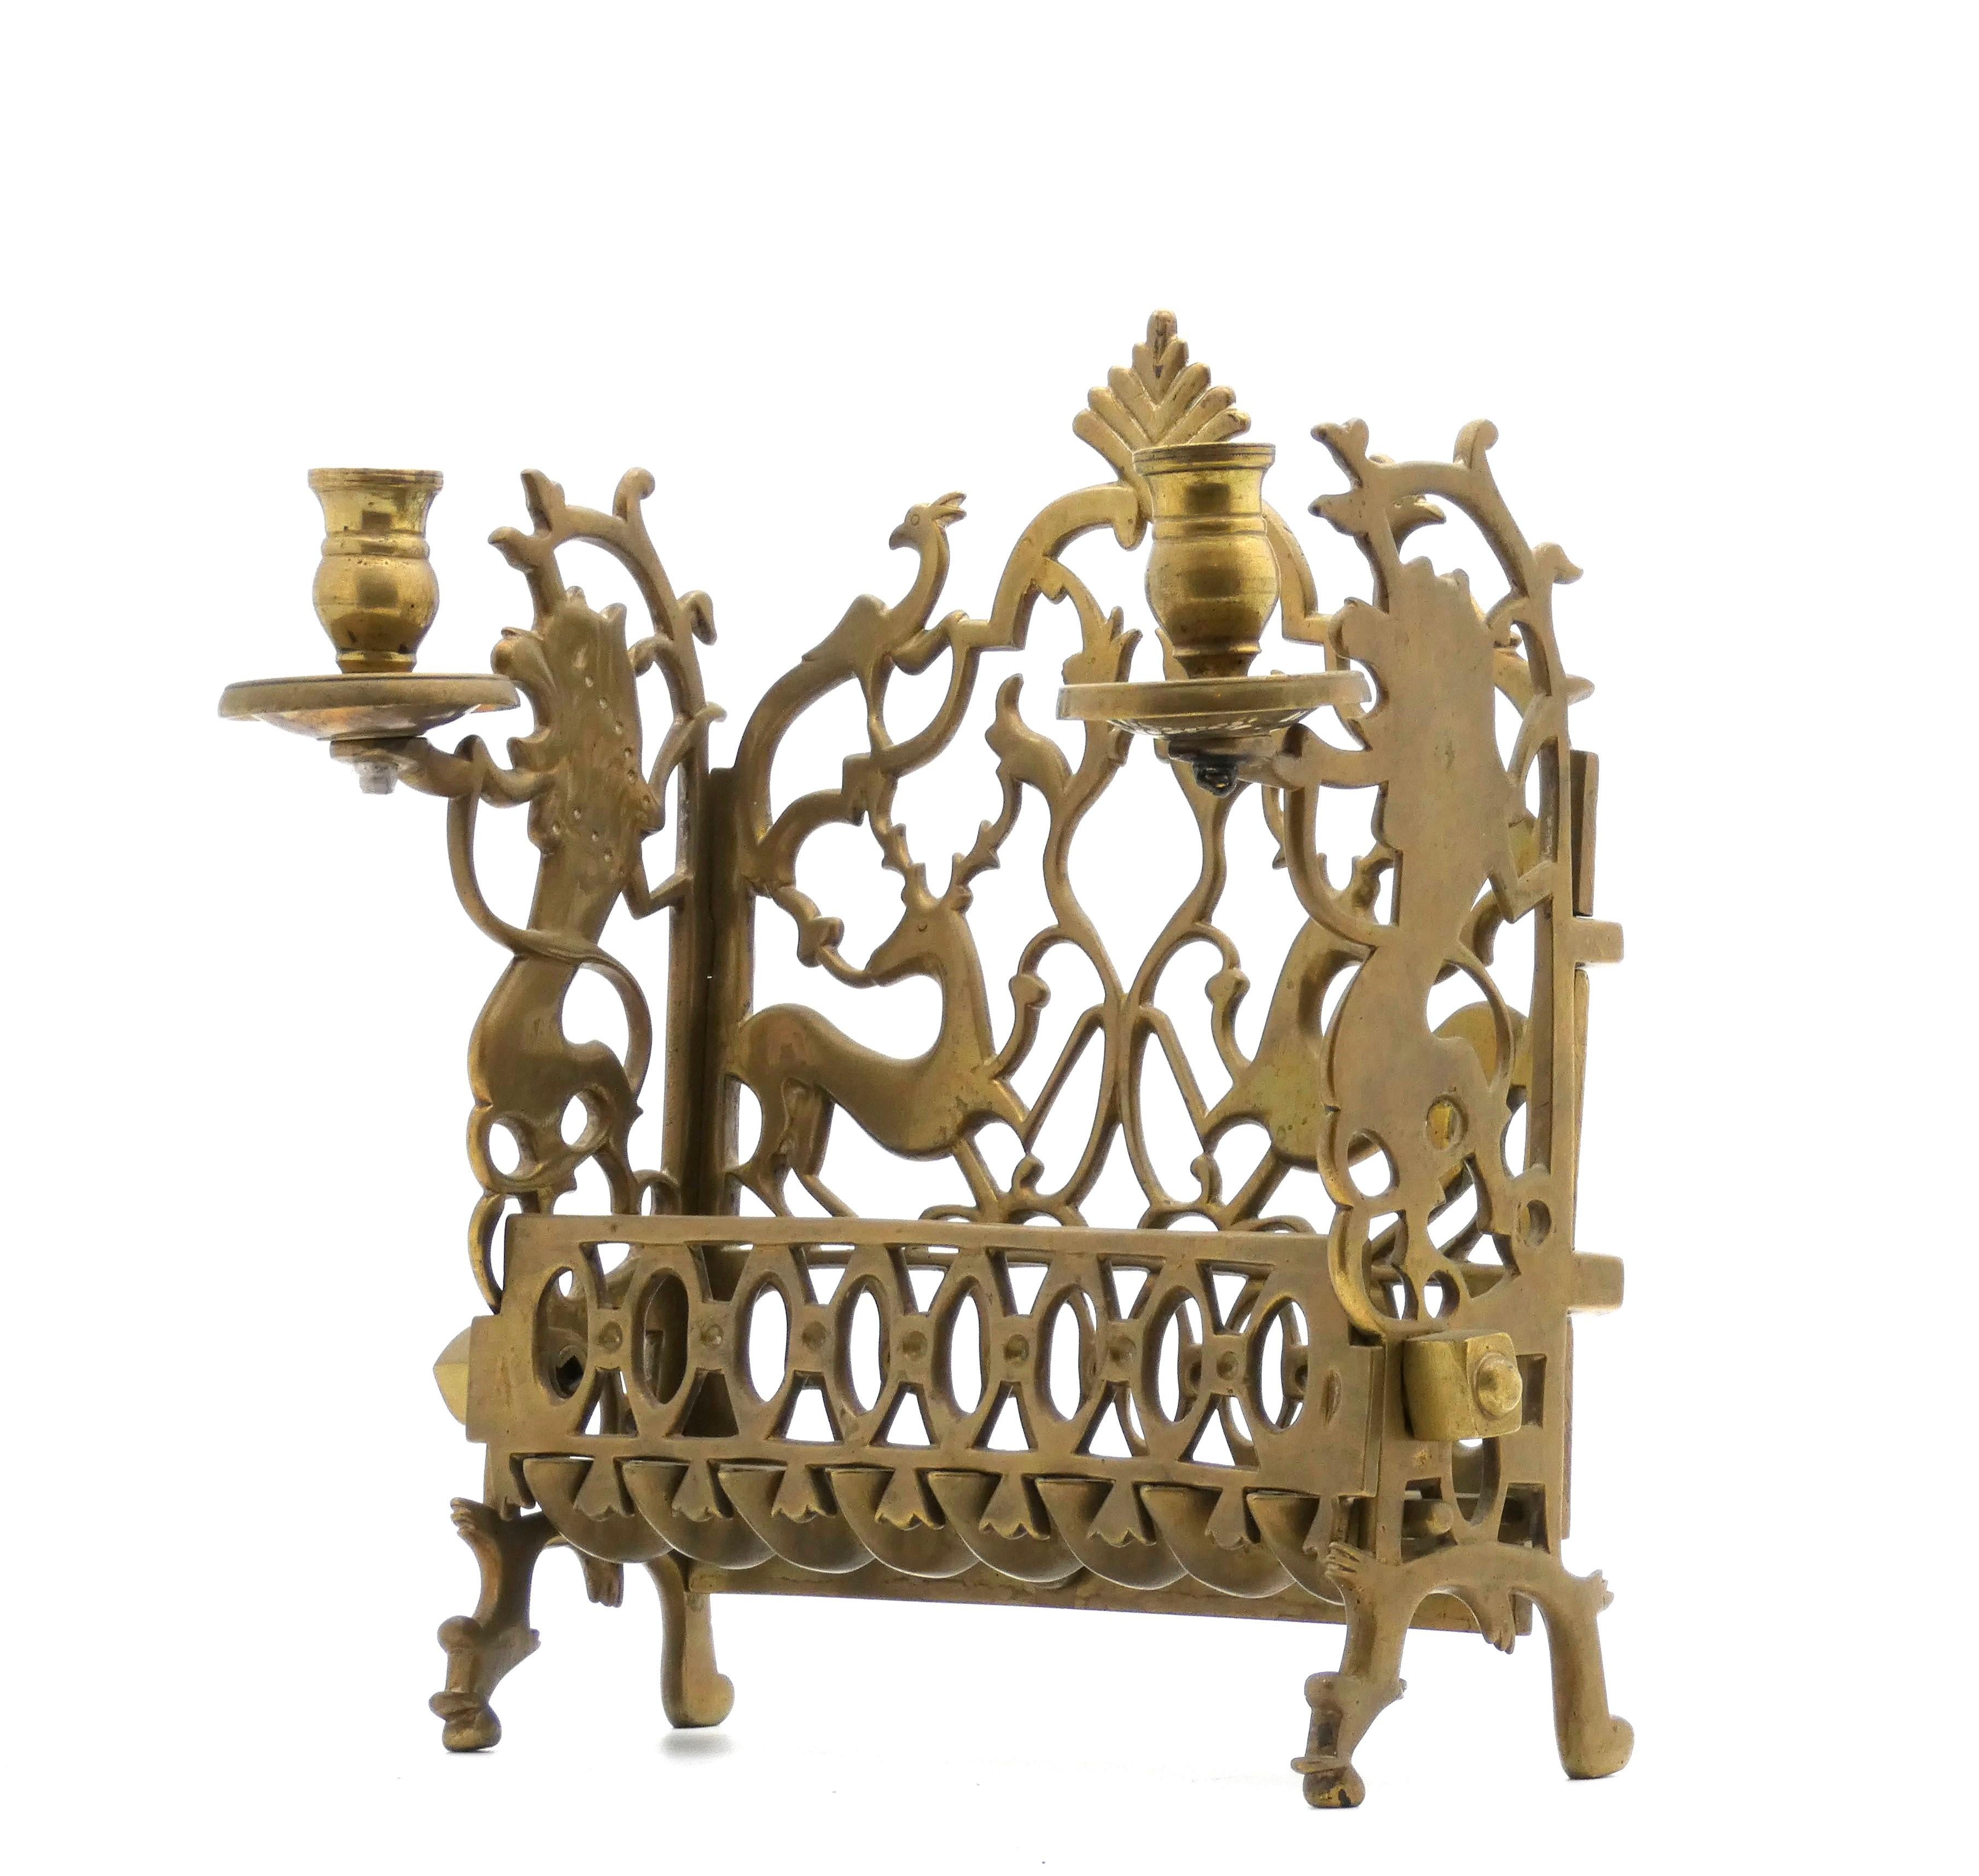 An Eastern Galician or Ukraine dually made for use as a Hanukkah Lamp or on Shabbat as two candlestick holders with a special sand casting method.

Beautifully cast back plate features two kneeling deer their heads turned gracefully backward, their